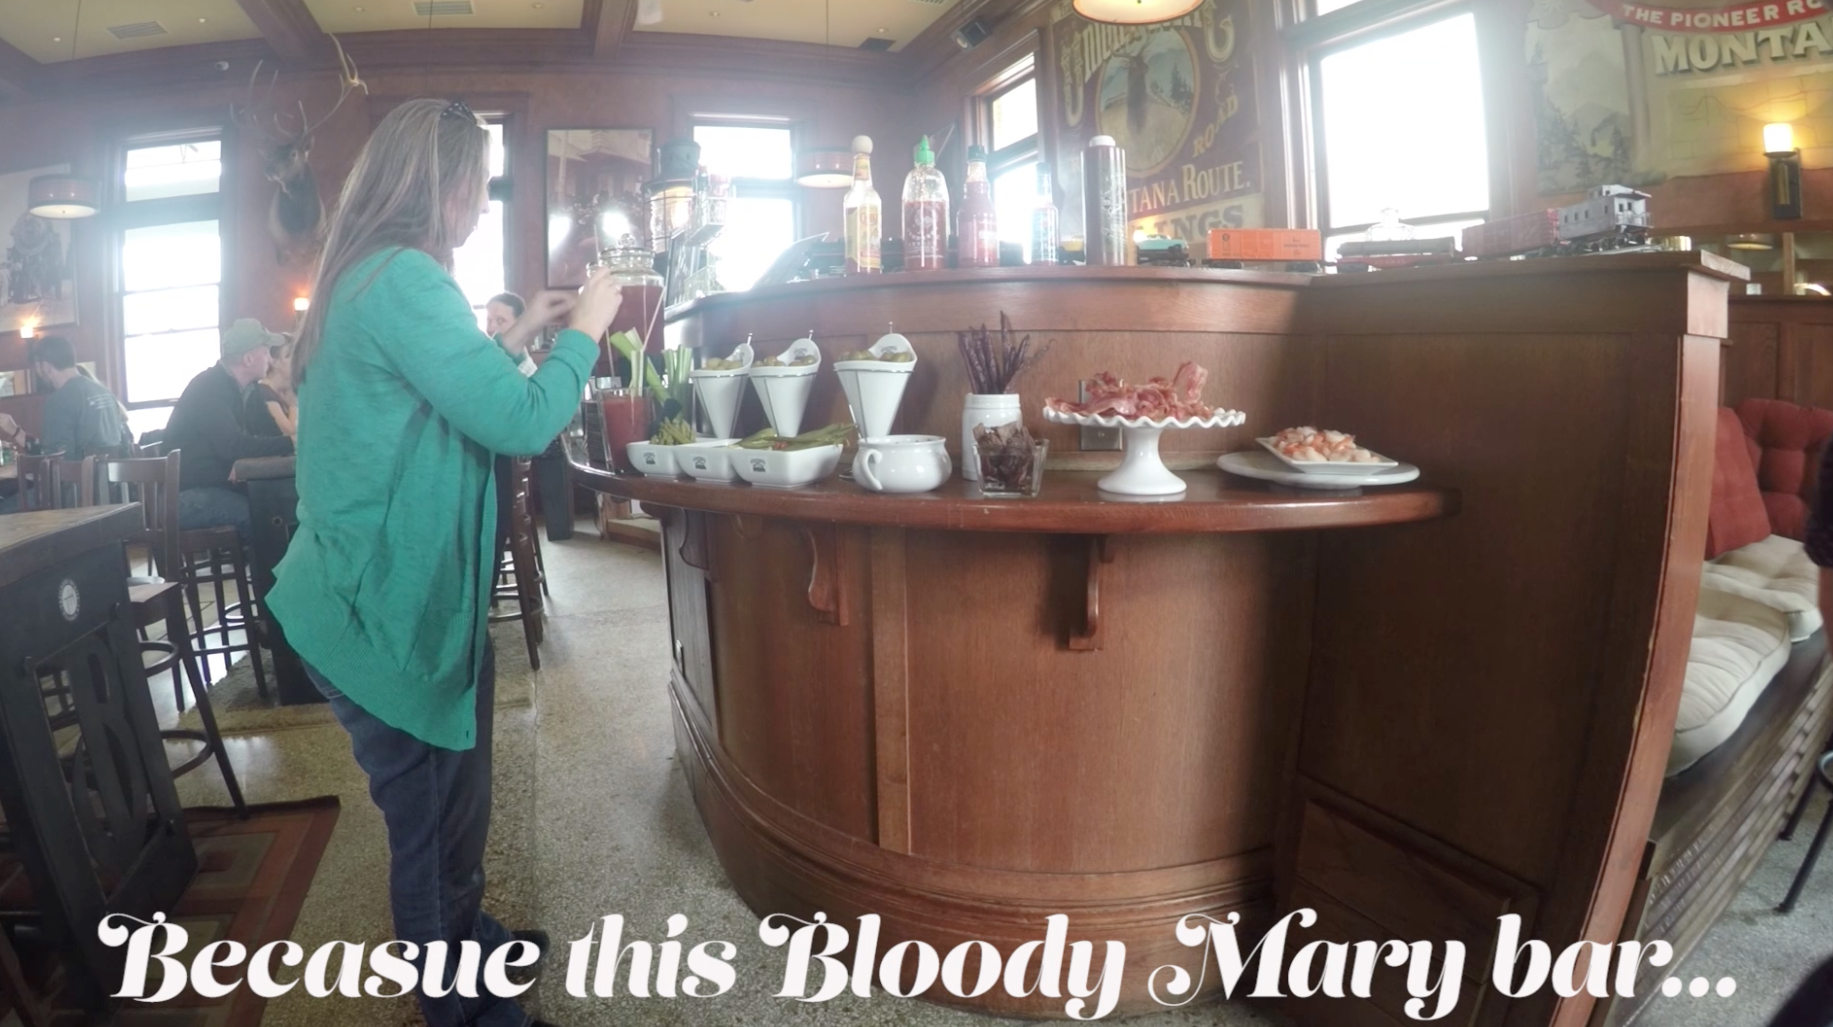 Made in Montana Bloody Mary bar at Trailhead Spirits in Billings, Montana.